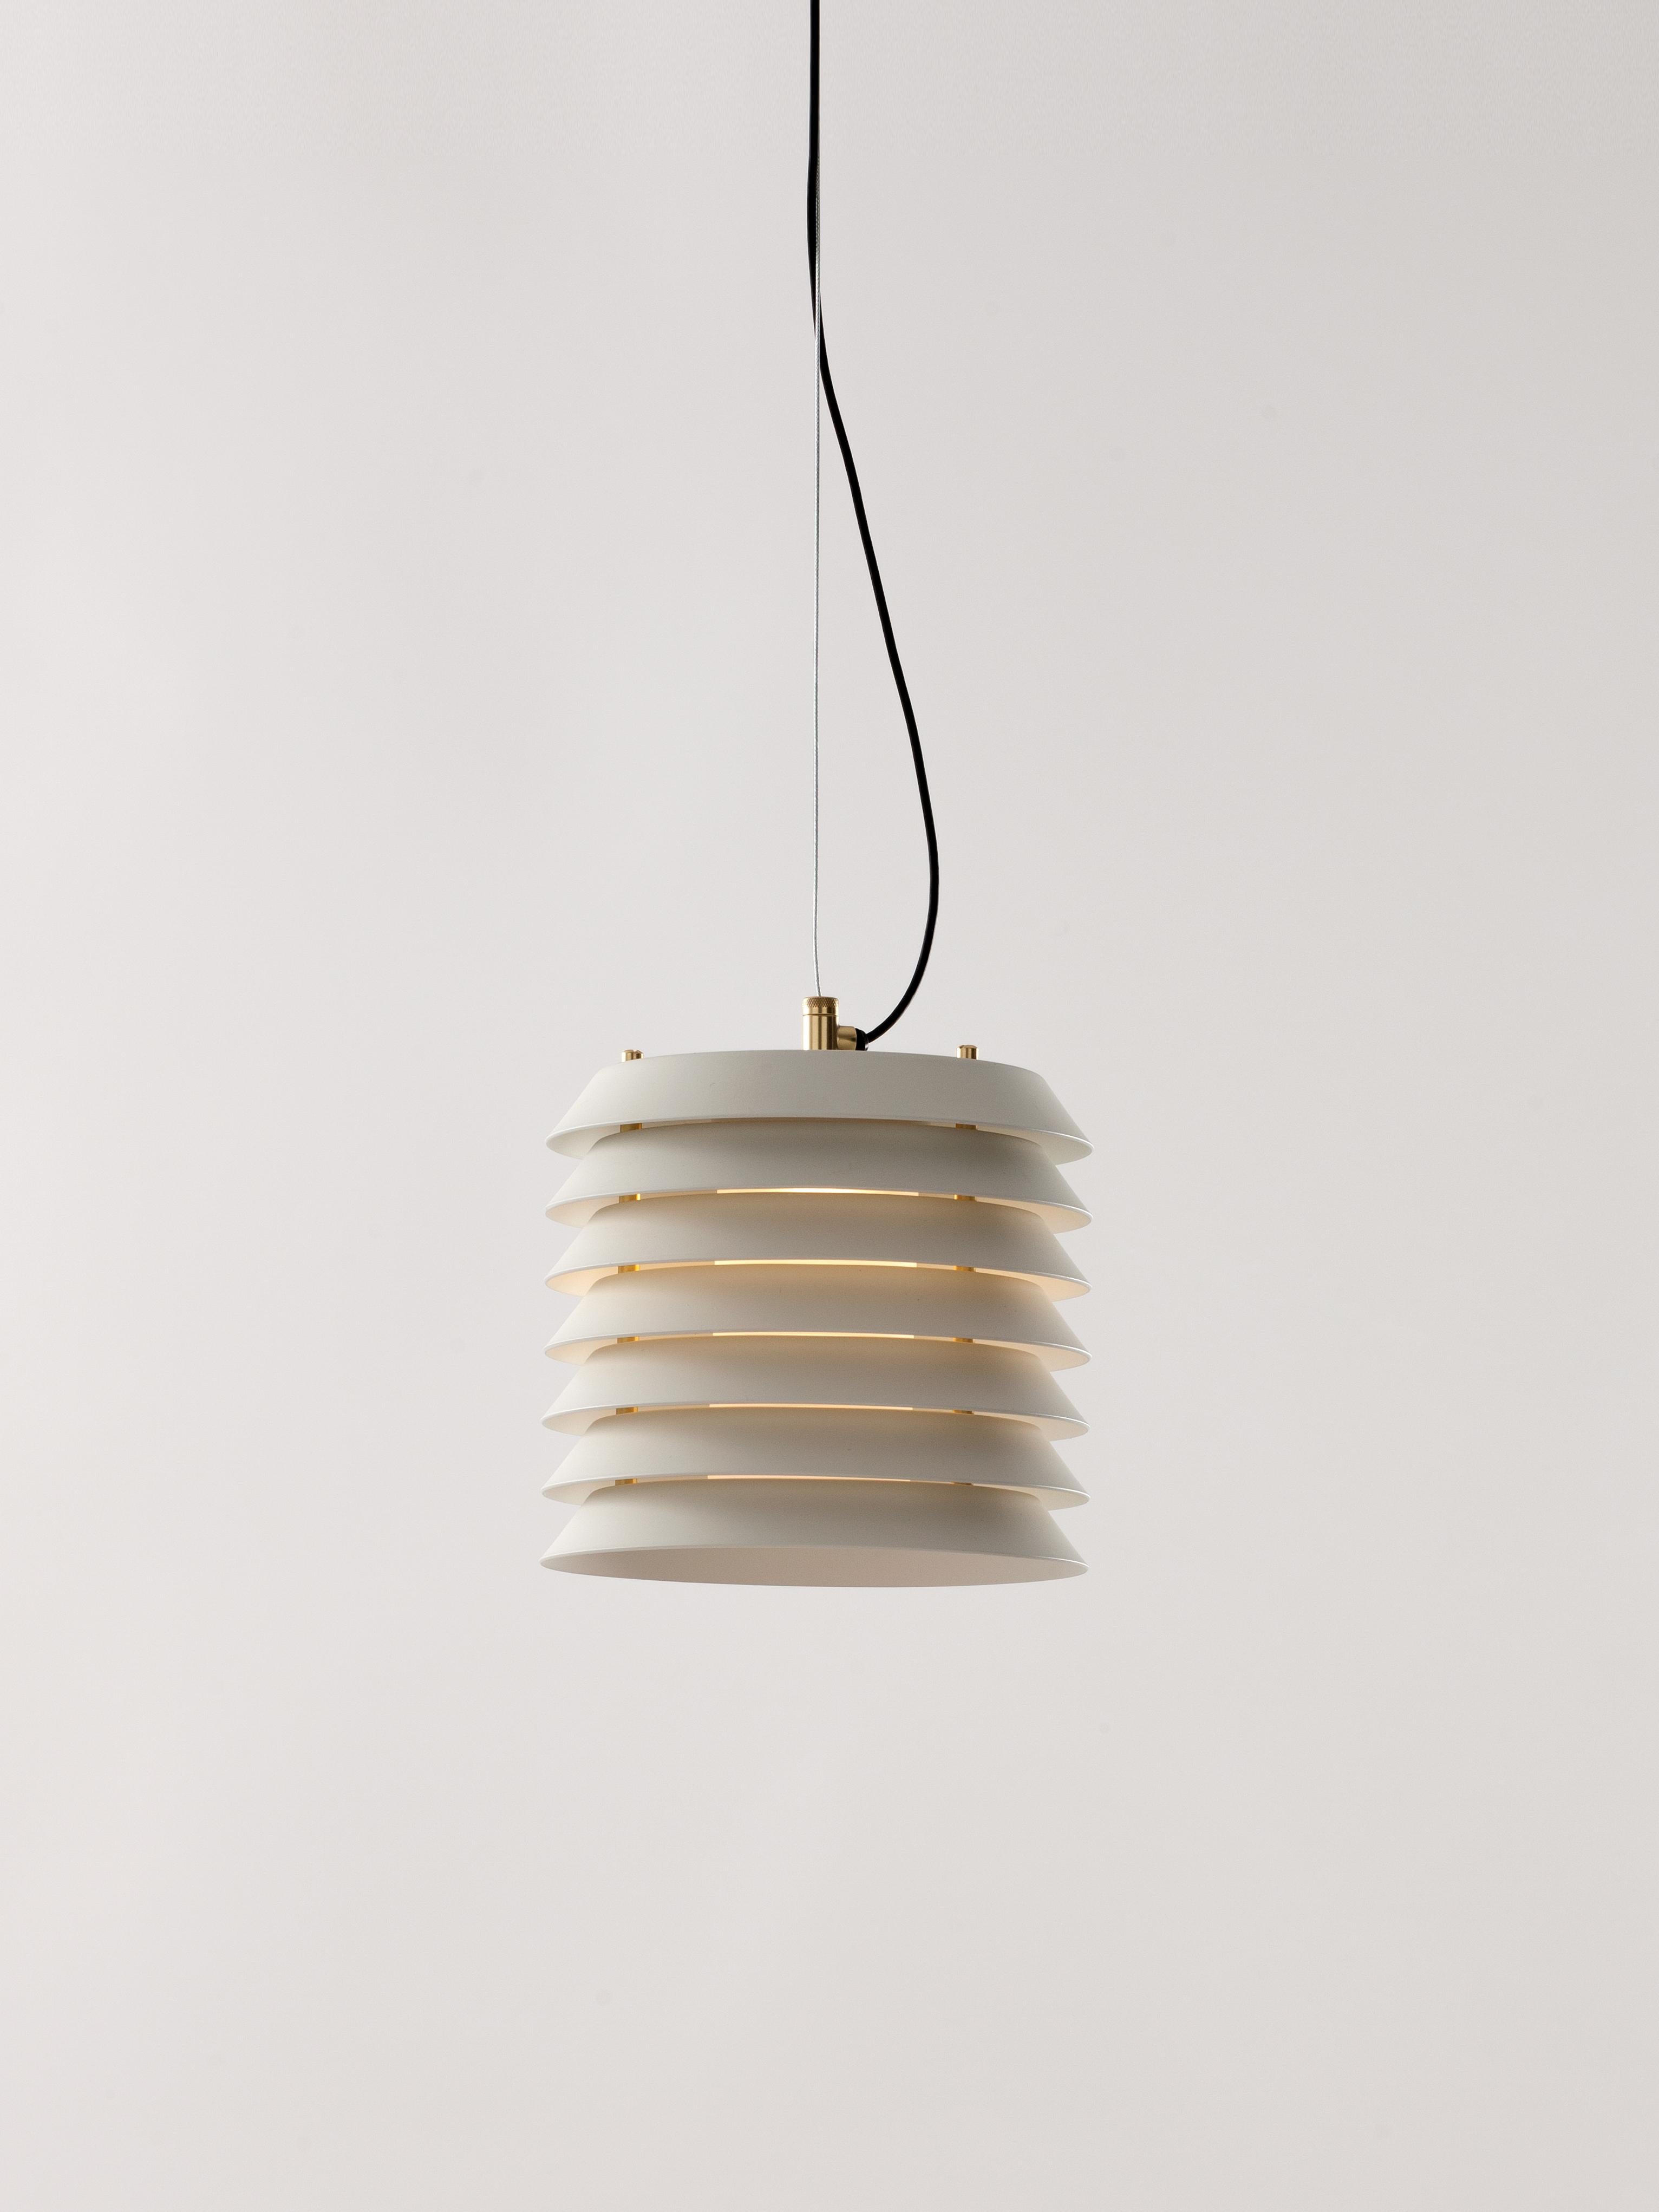 White Maija 15 Pendant Lamp by Ilmari Tapiovaara.
Dimensions: D 15 x H 14 cm.
Materials: Metal, glass.
Available in white or nude rose.

Maija conveys the feeling of light typical of Baltic cities, where the streets are barely illuminated,